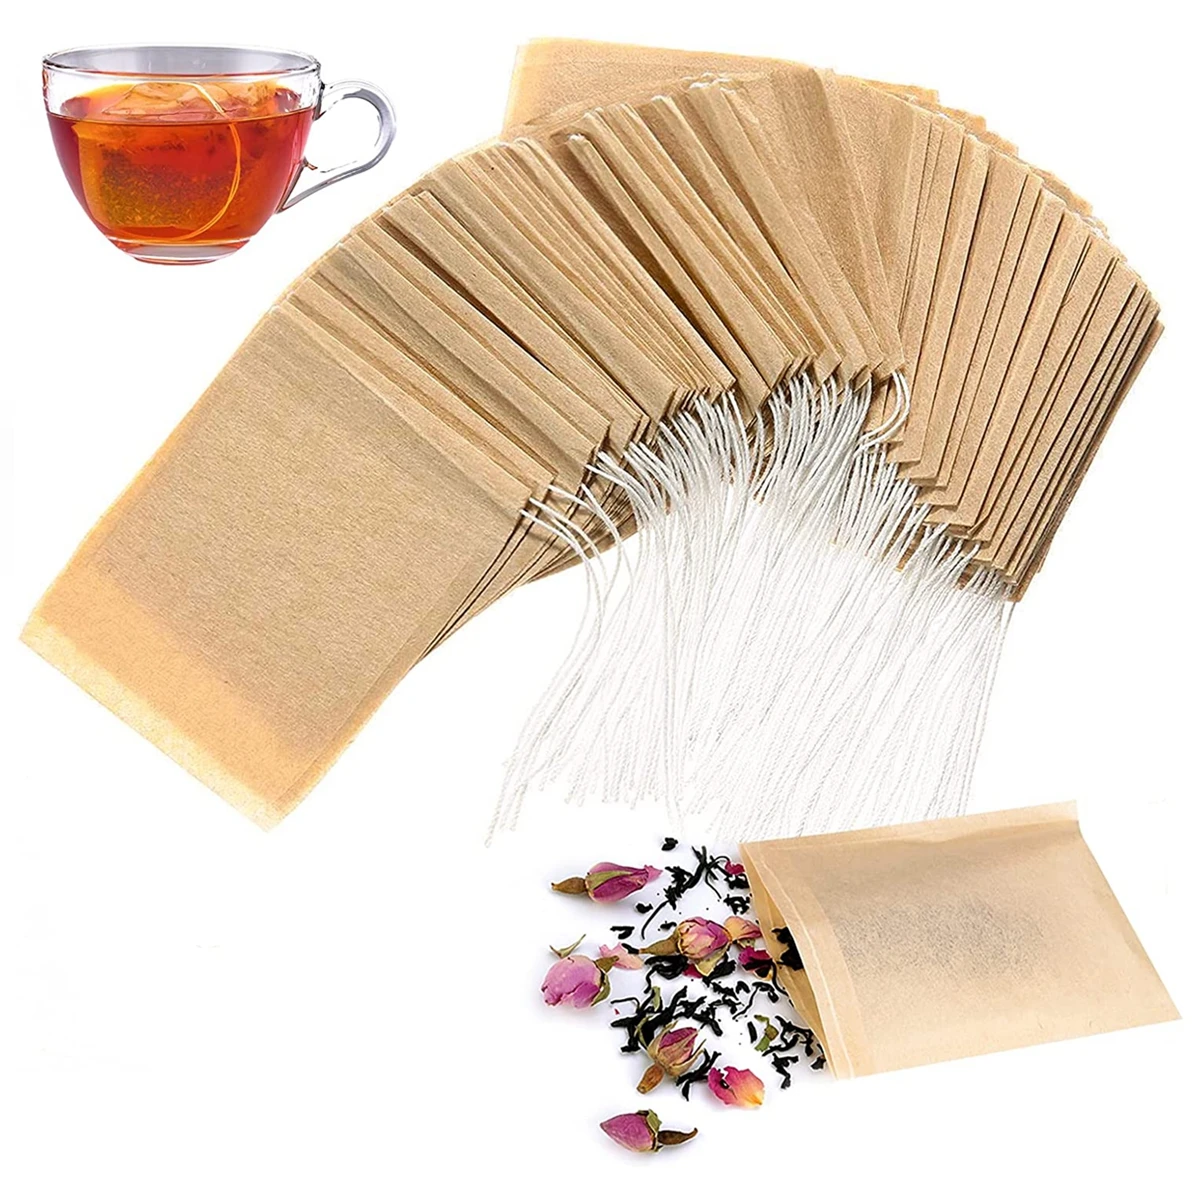  100Pcs Disposable Tea Bags for Loose Leaf Tea, 100% Natural  Wood Pulp Paper Material, Empty Unbleached Filter Bags with Drawstring  (3.54 x 2.75 inch) : Home & Kitchen